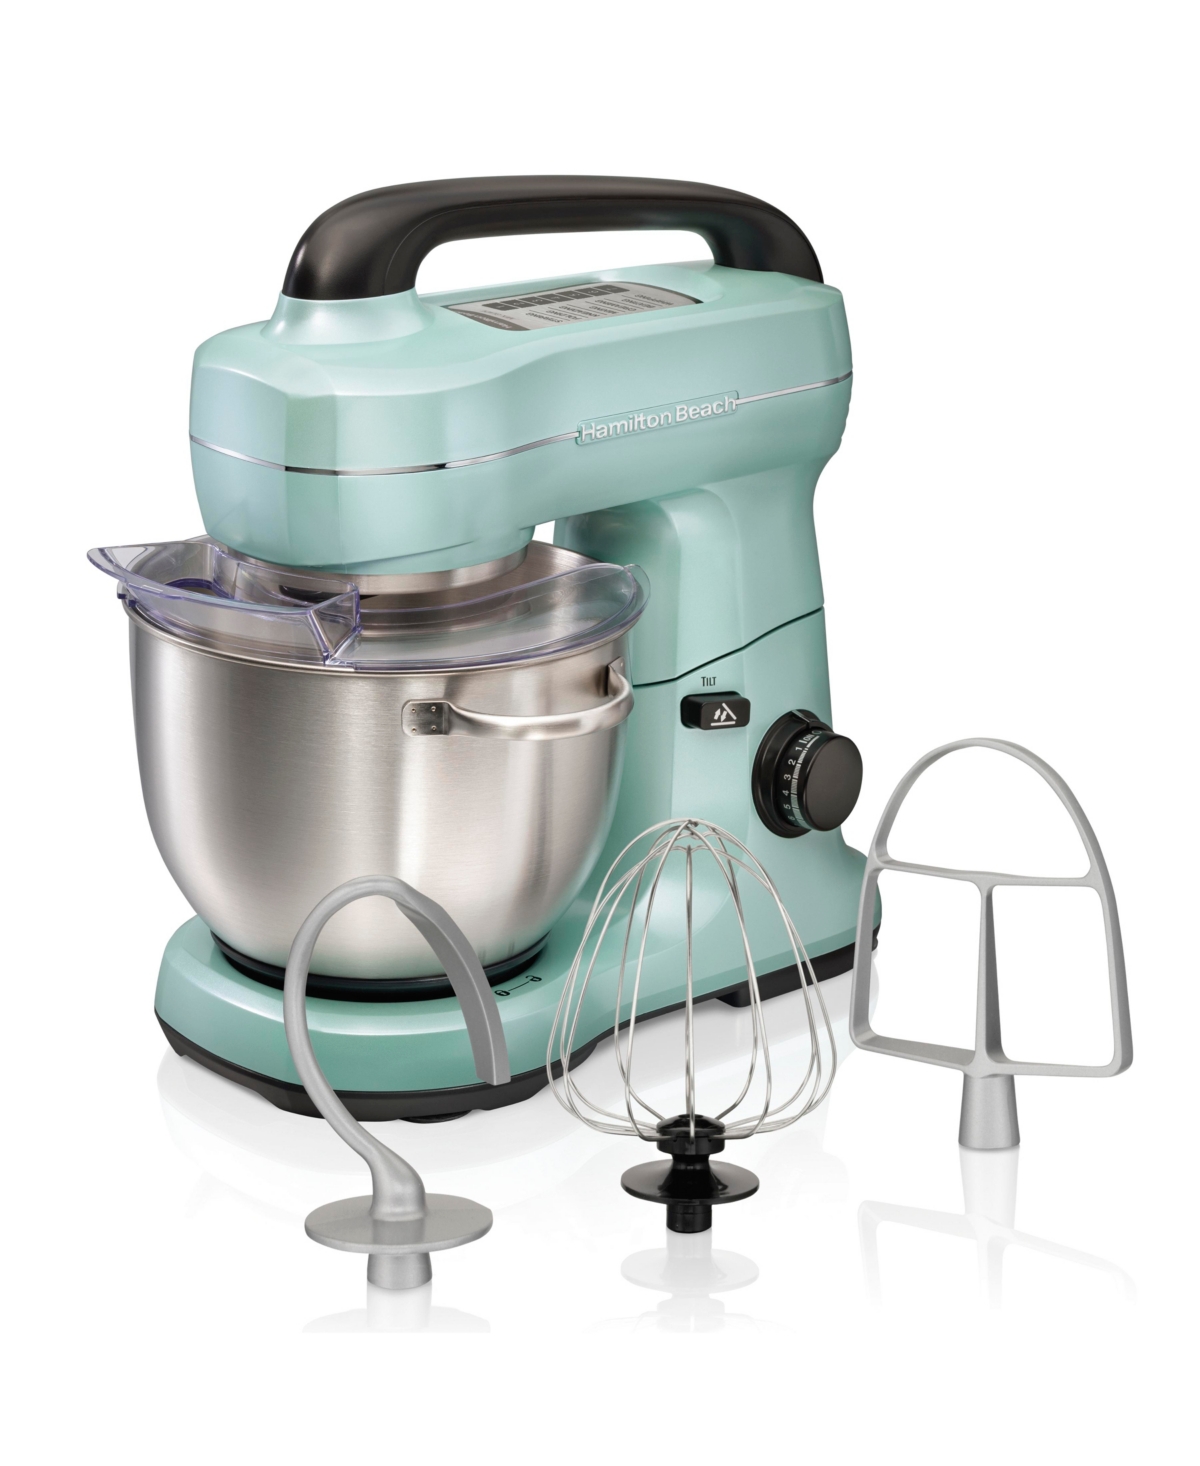 Hamilton Beach Stand Mixer With 4 Quart Stainless Steel Bowl In Aqua